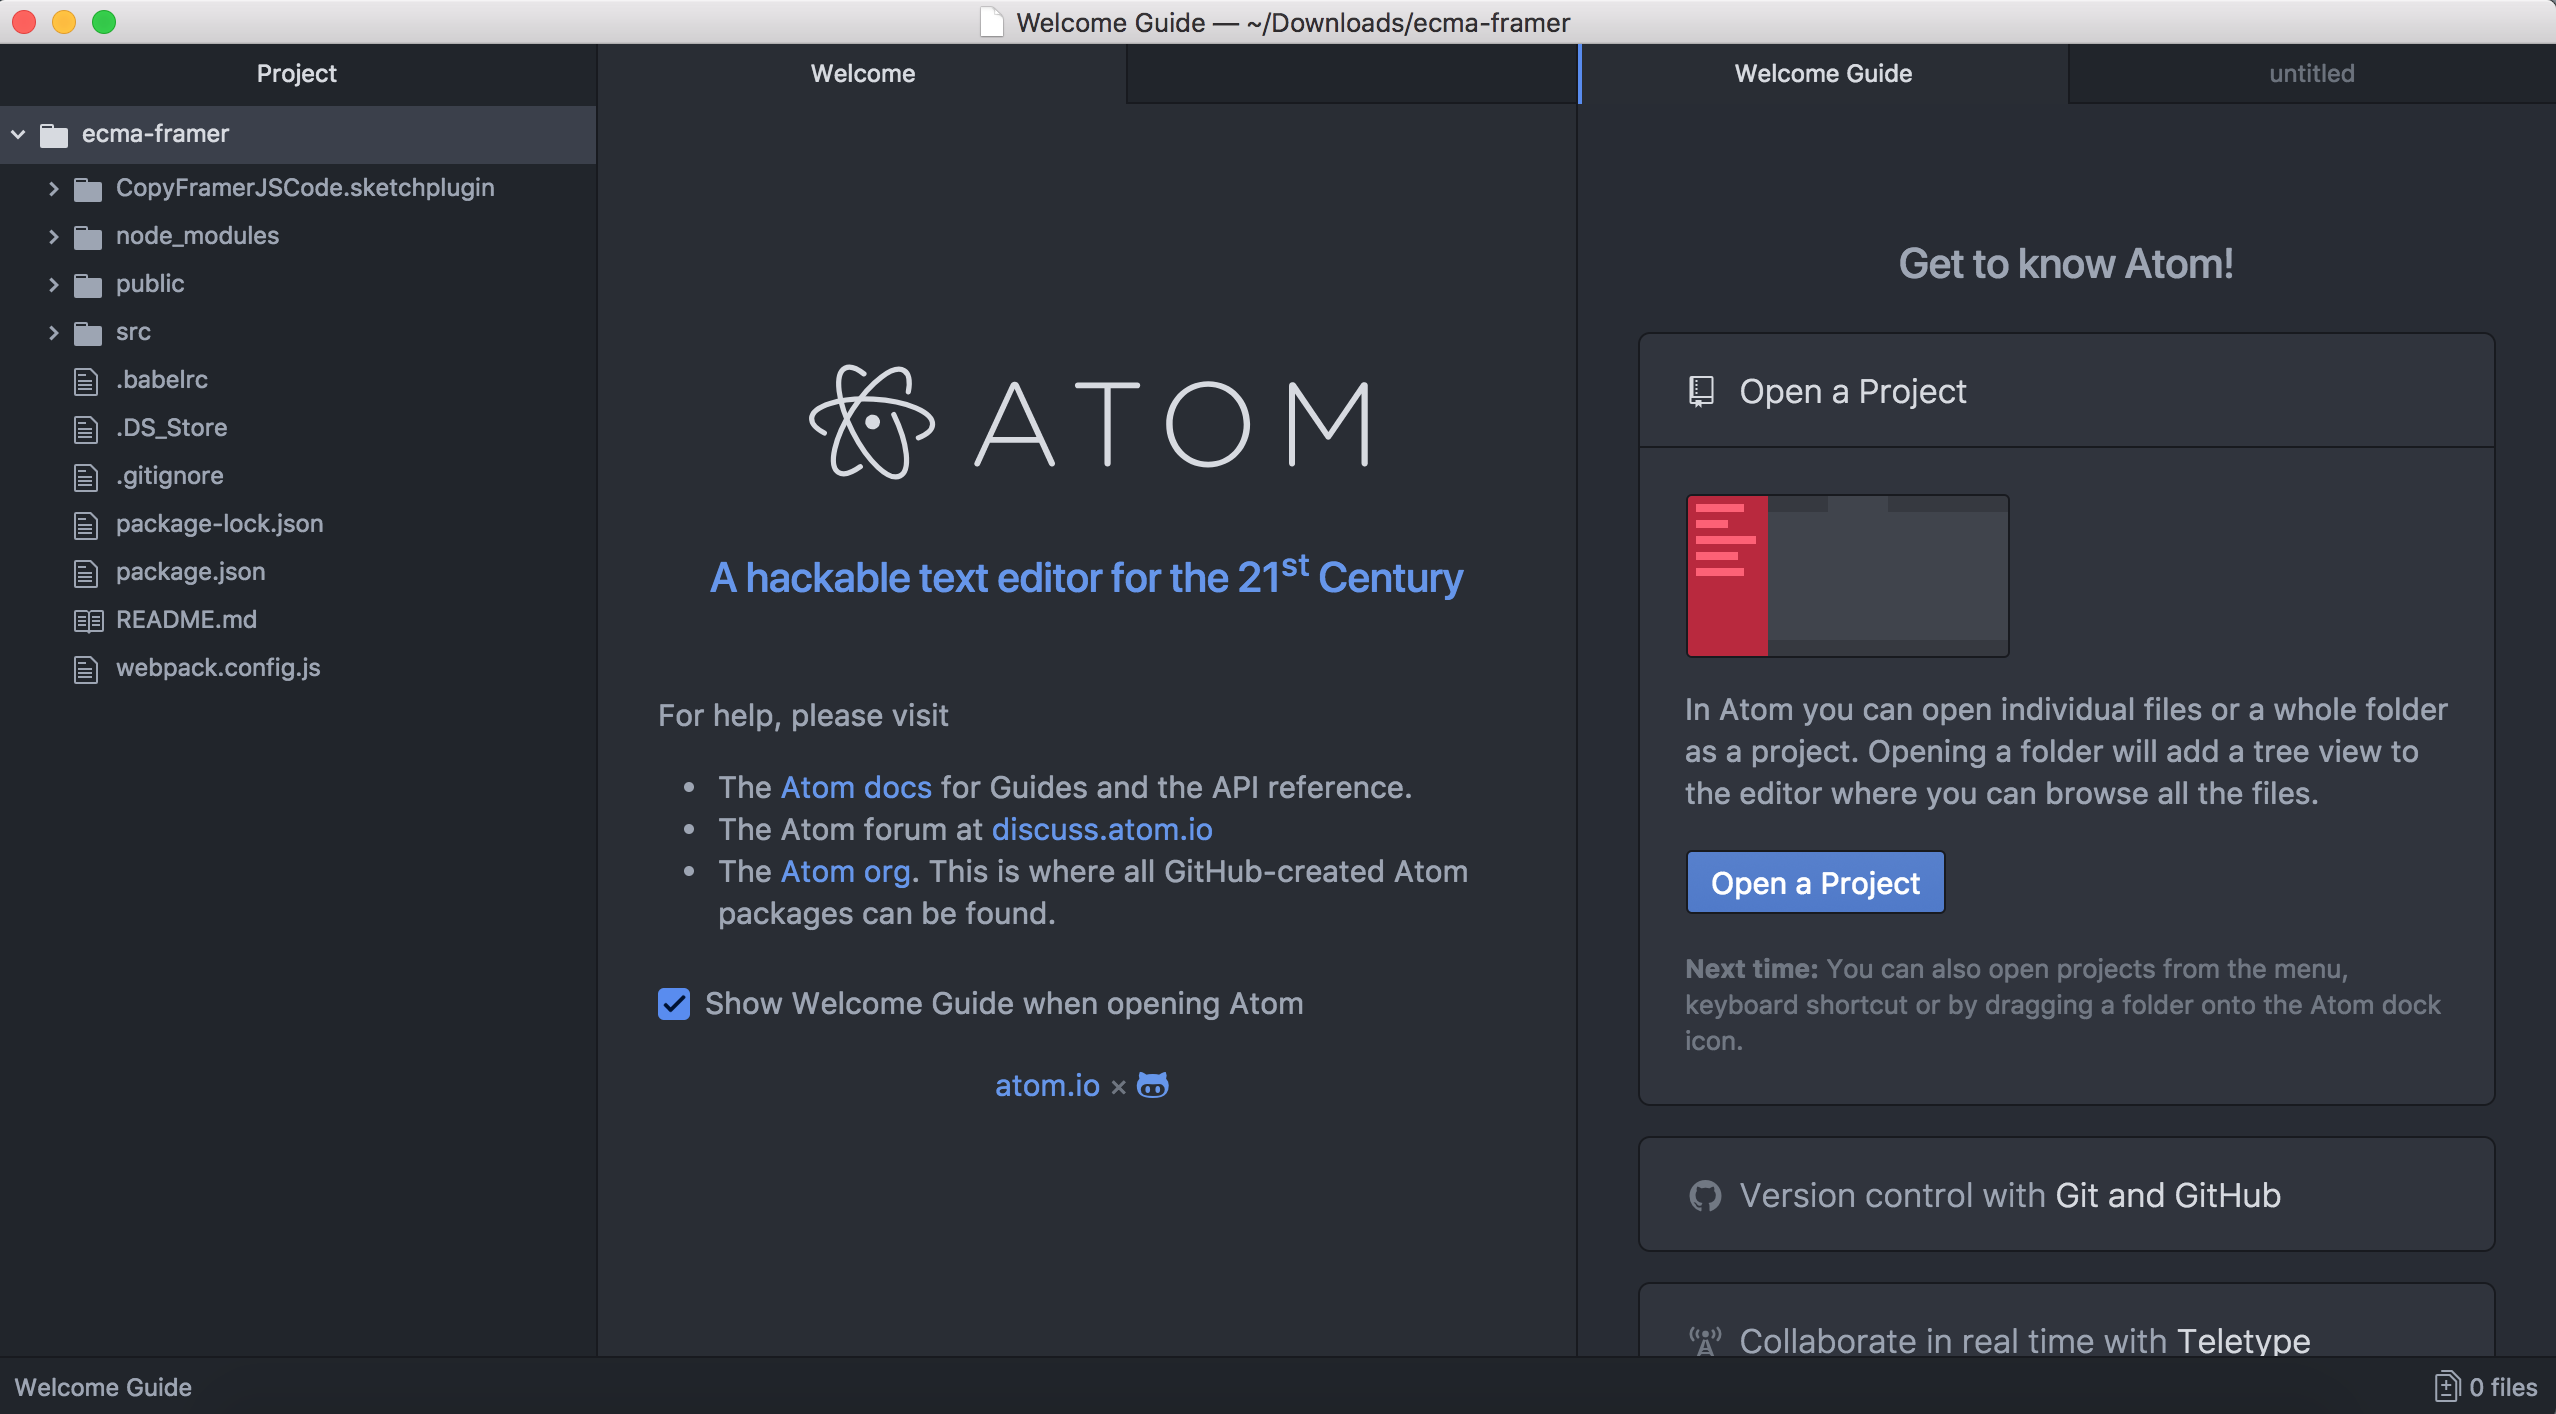 Atom screen after opening our project